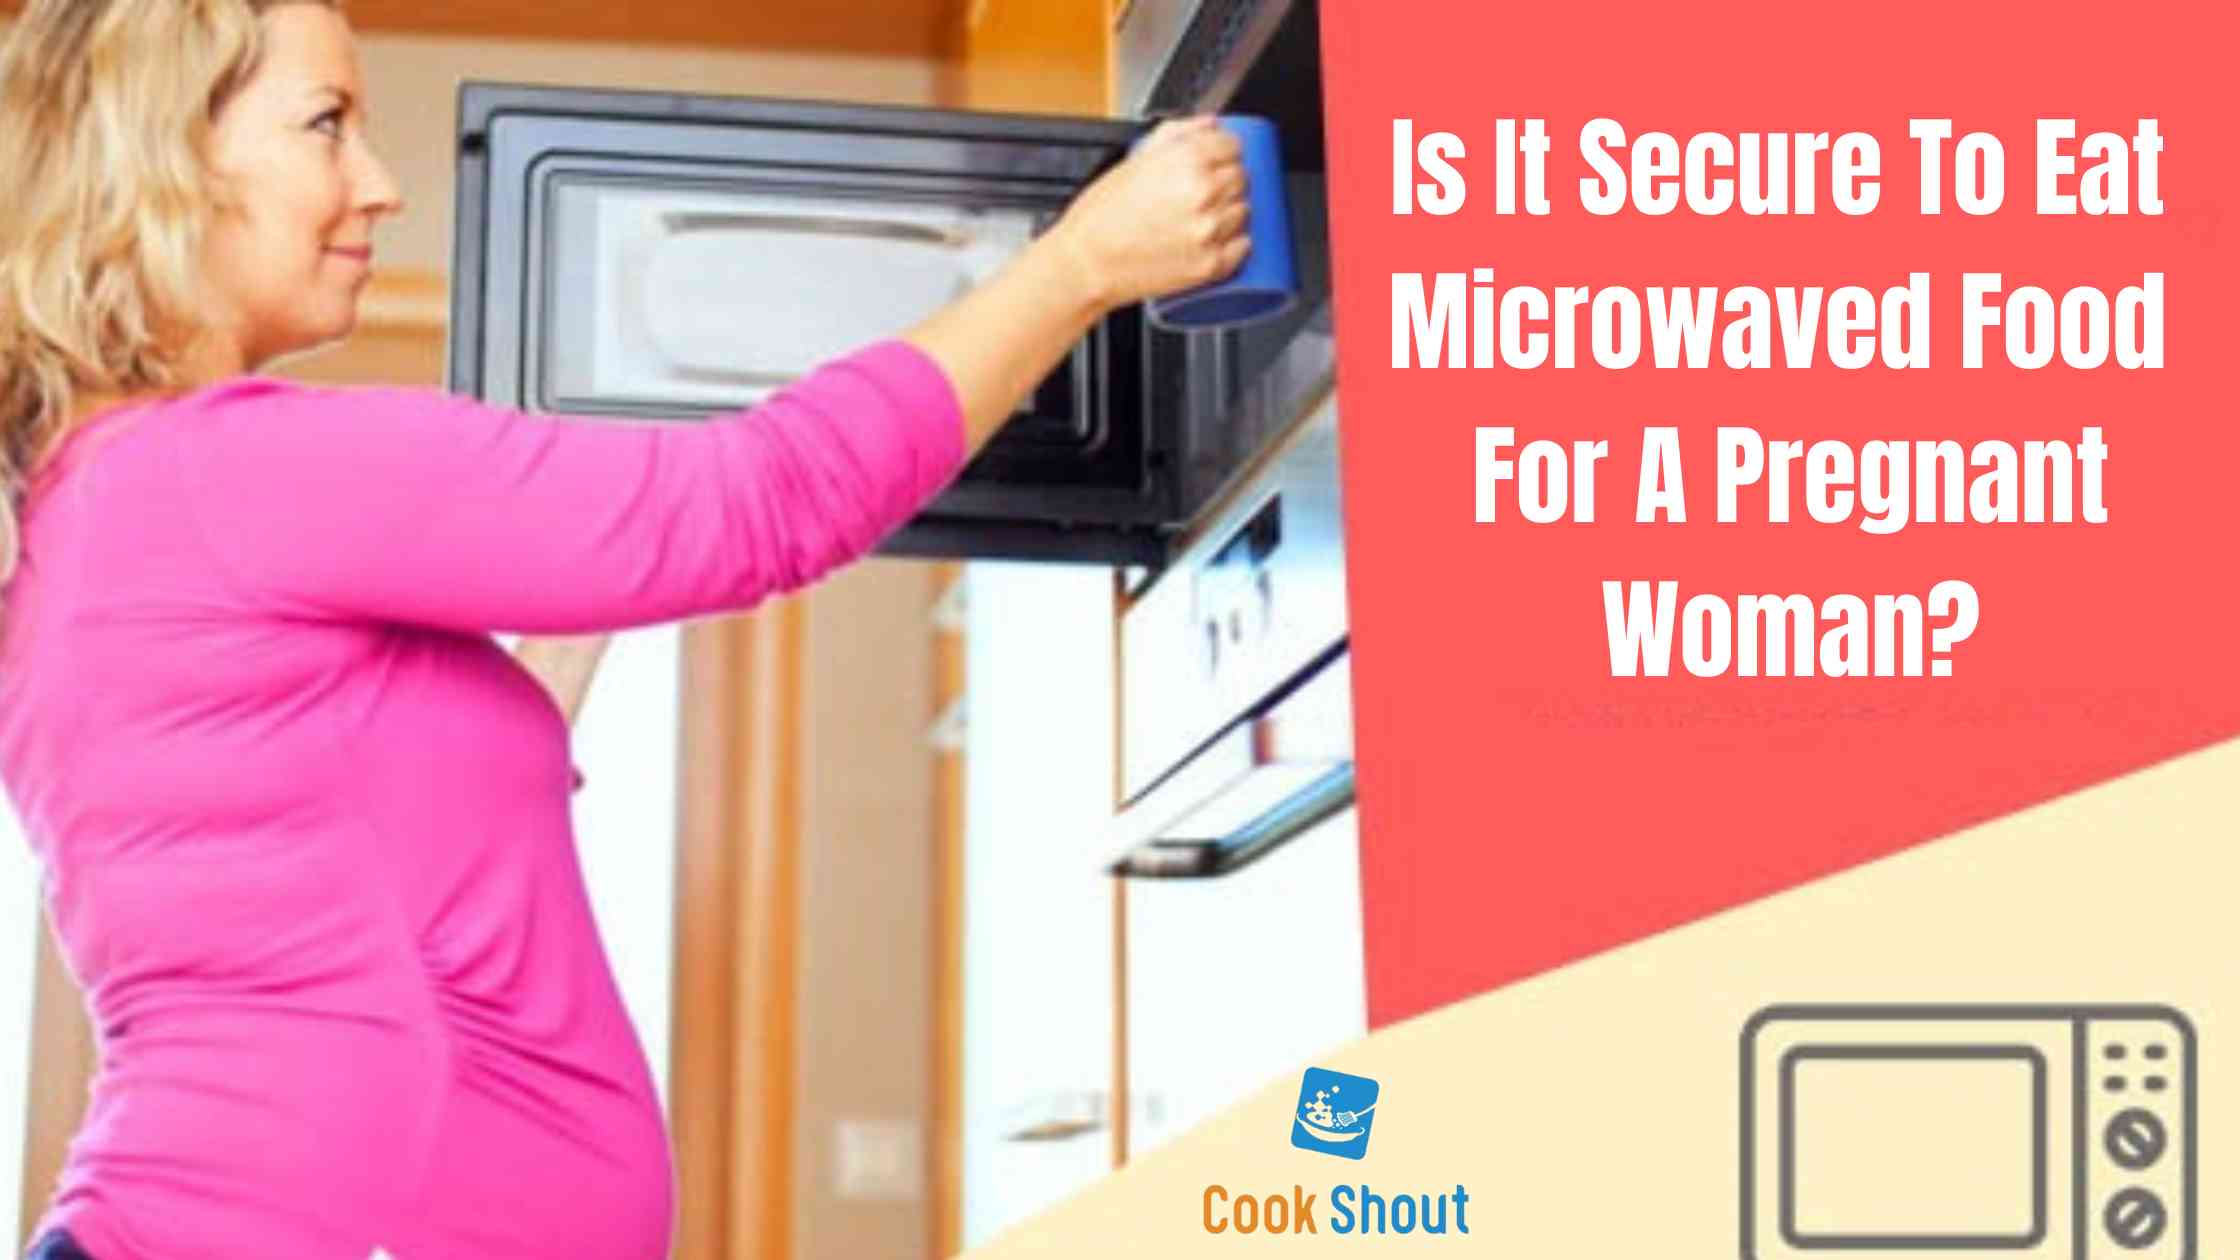 Is It Secure To Eat Microwaved Food For A Pregnant Woman